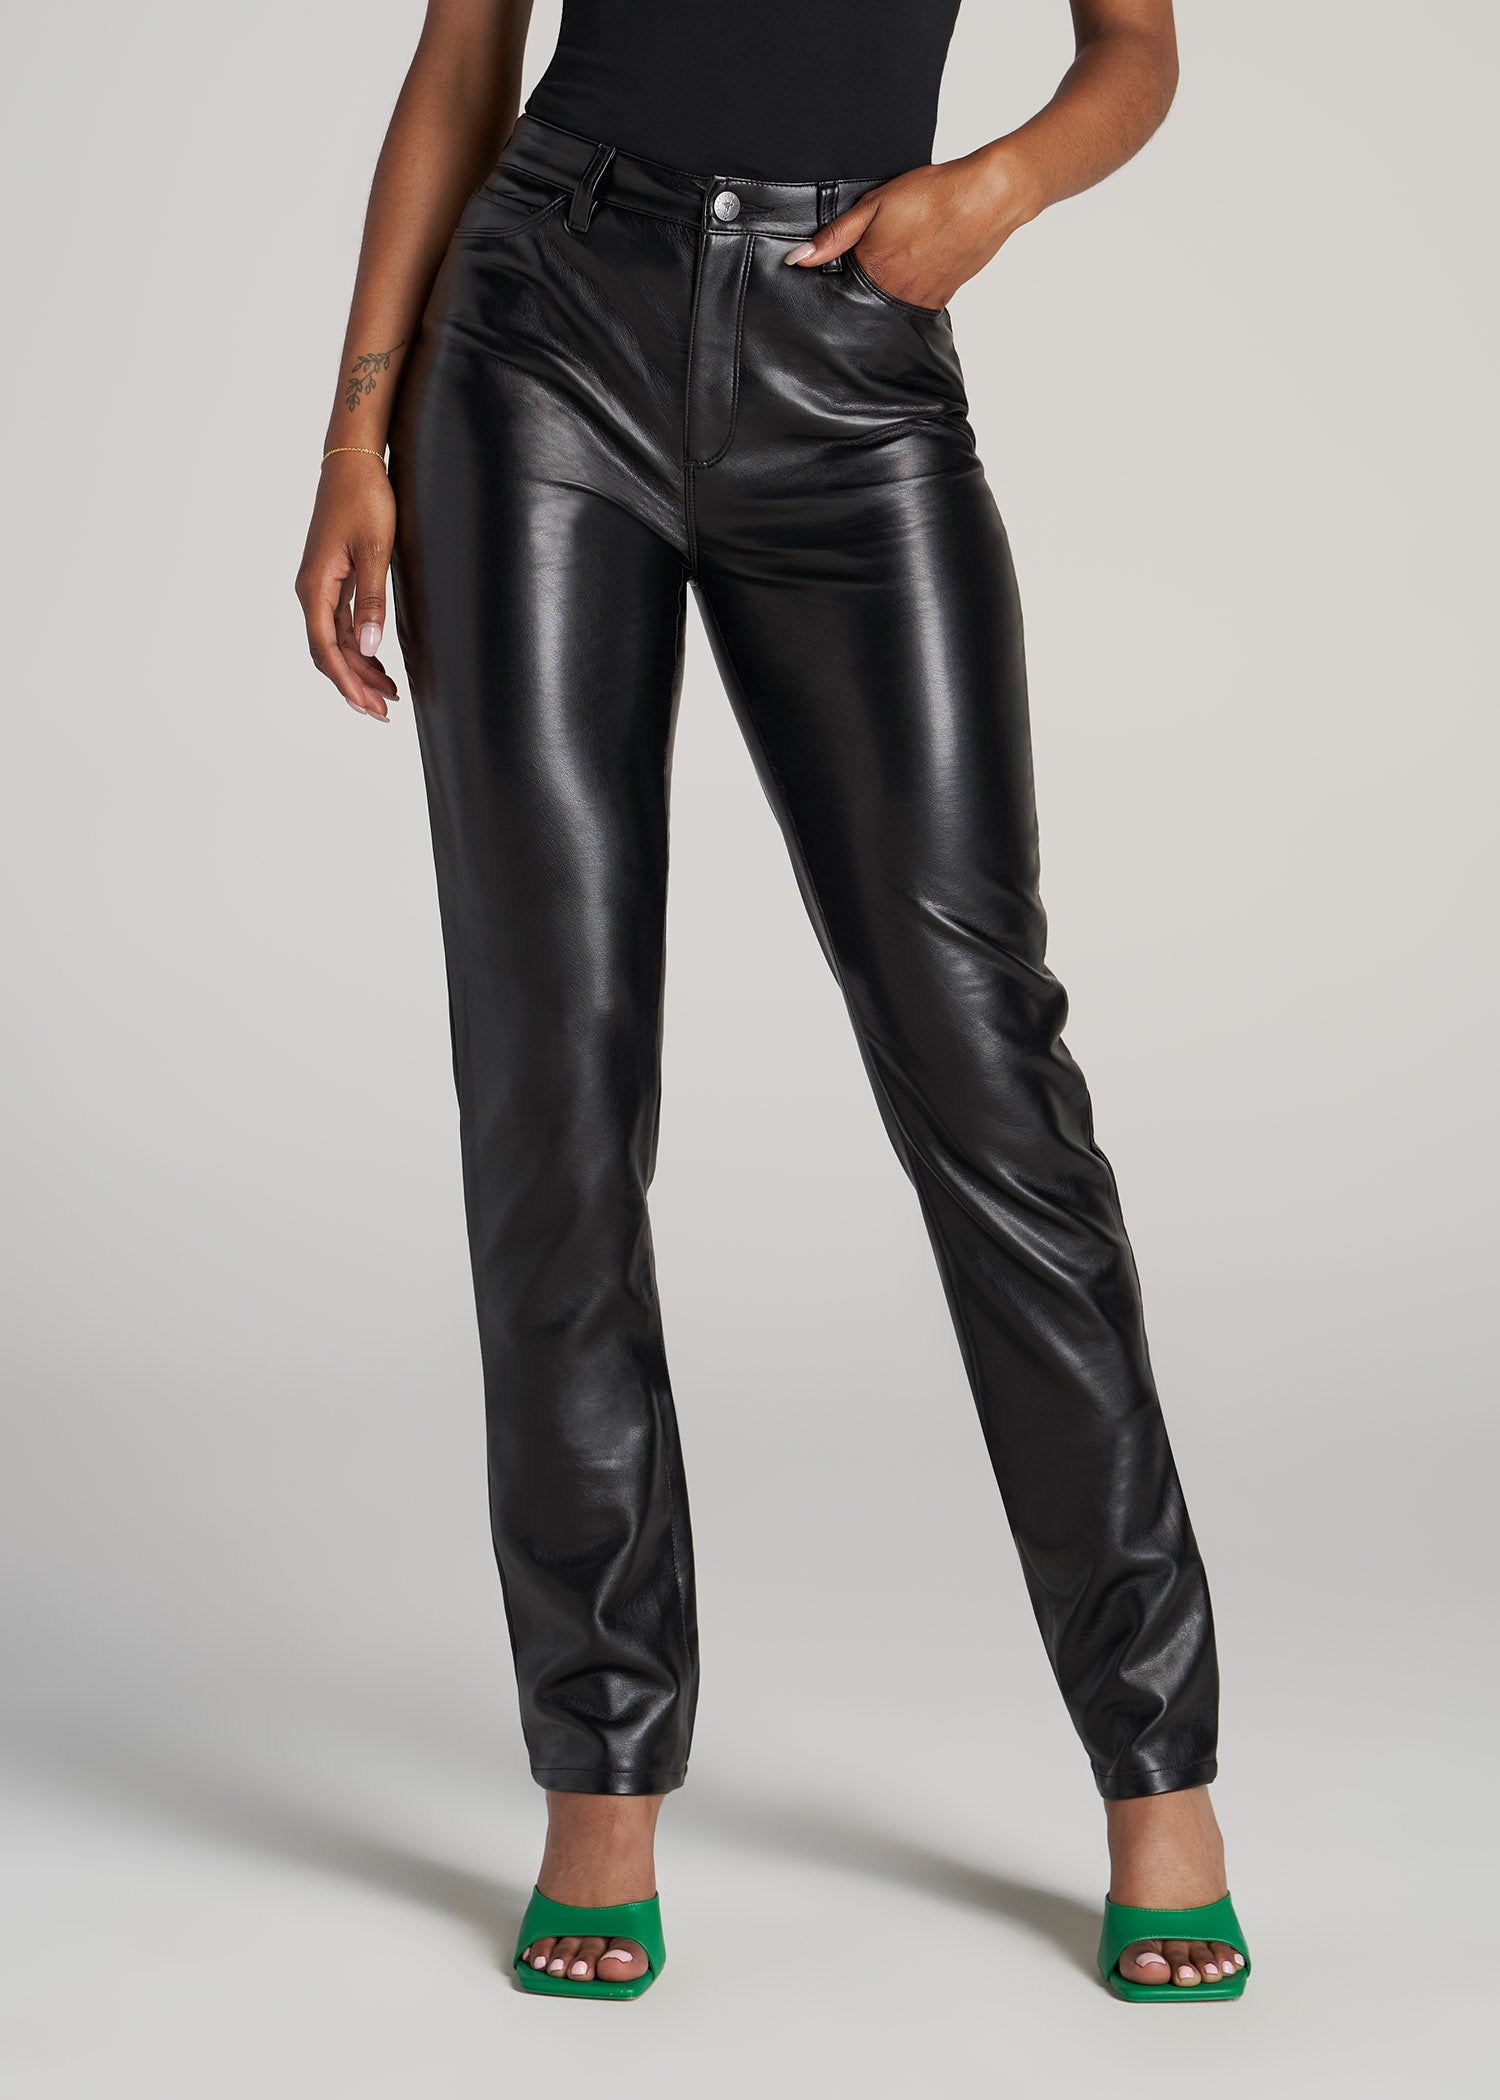 Faux Patent Leather Leggings  Patent leather leggings, Leather leggings,  Leather